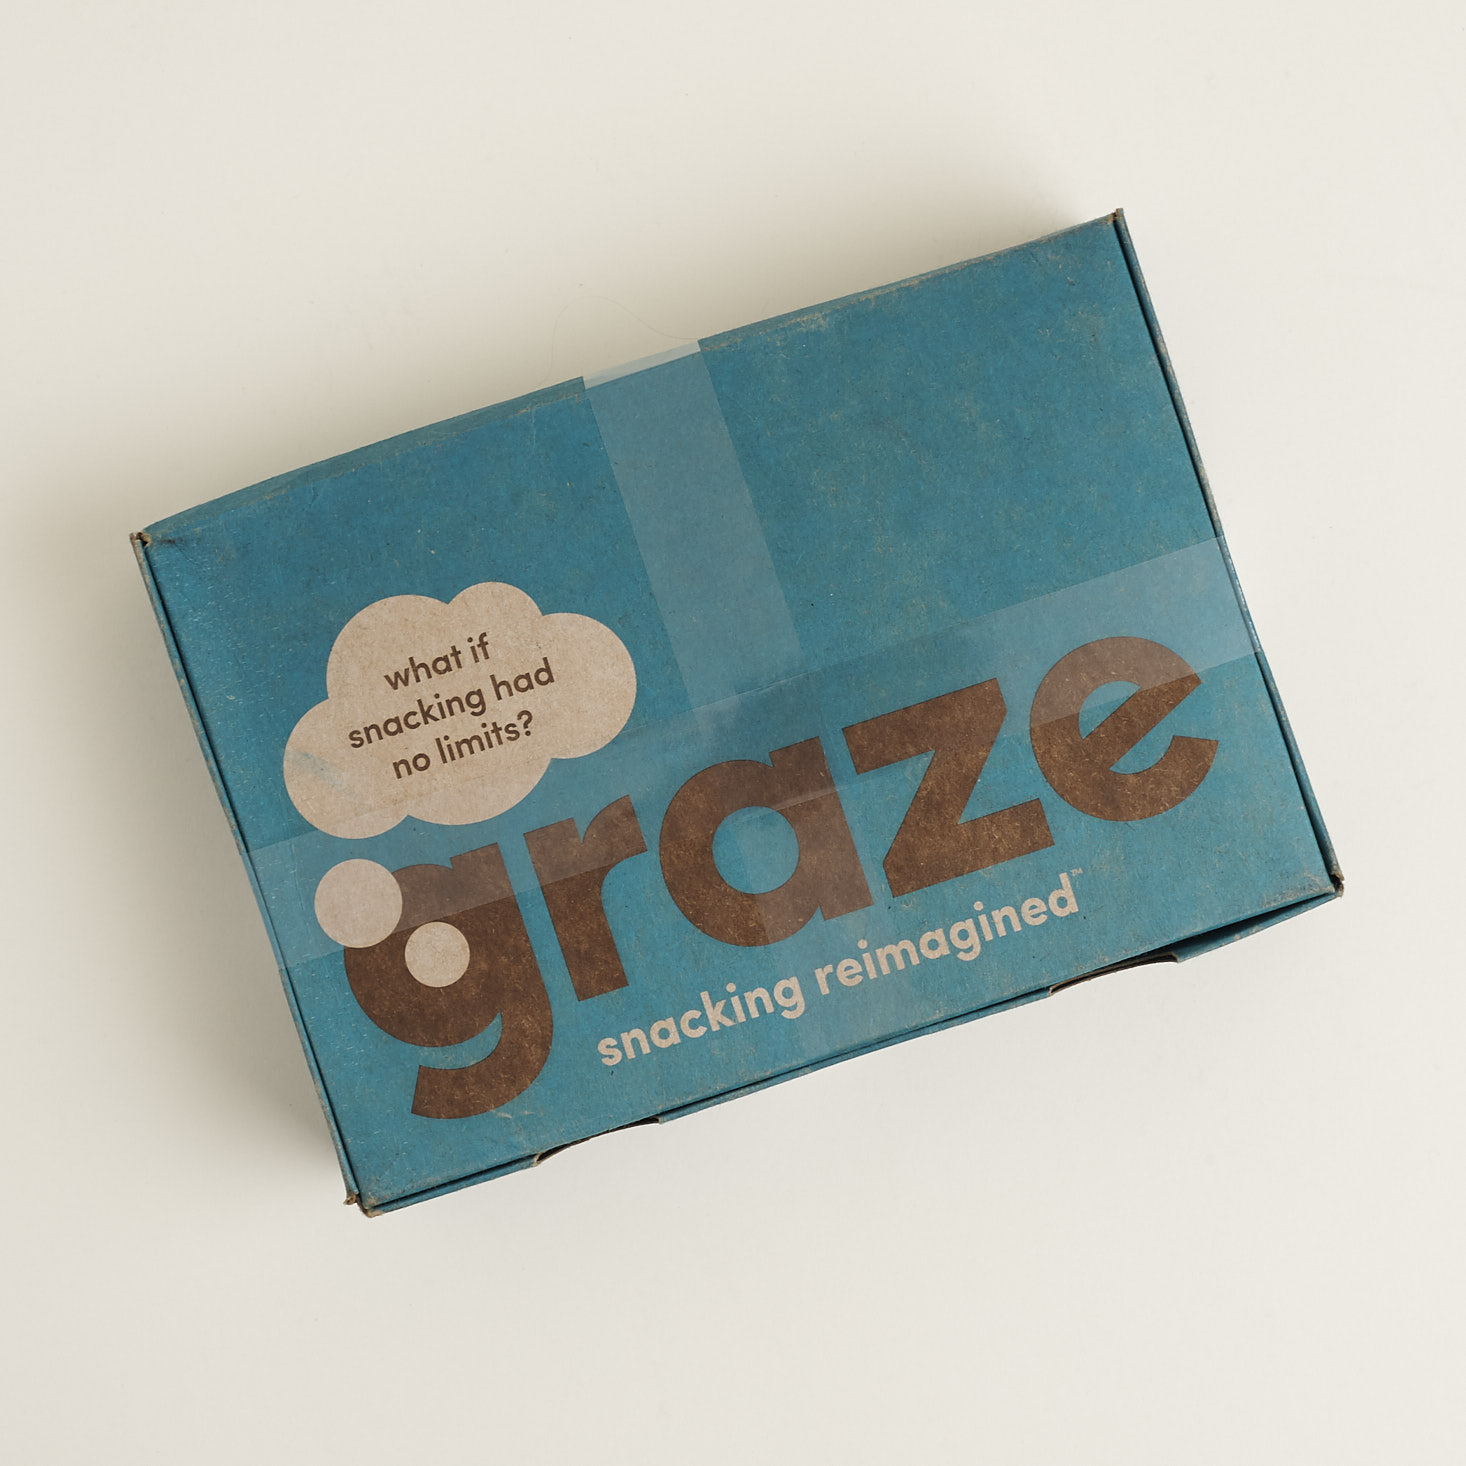 Graze 8 Snack Variety Box Review #2 + Free Box Coupon – July 2018